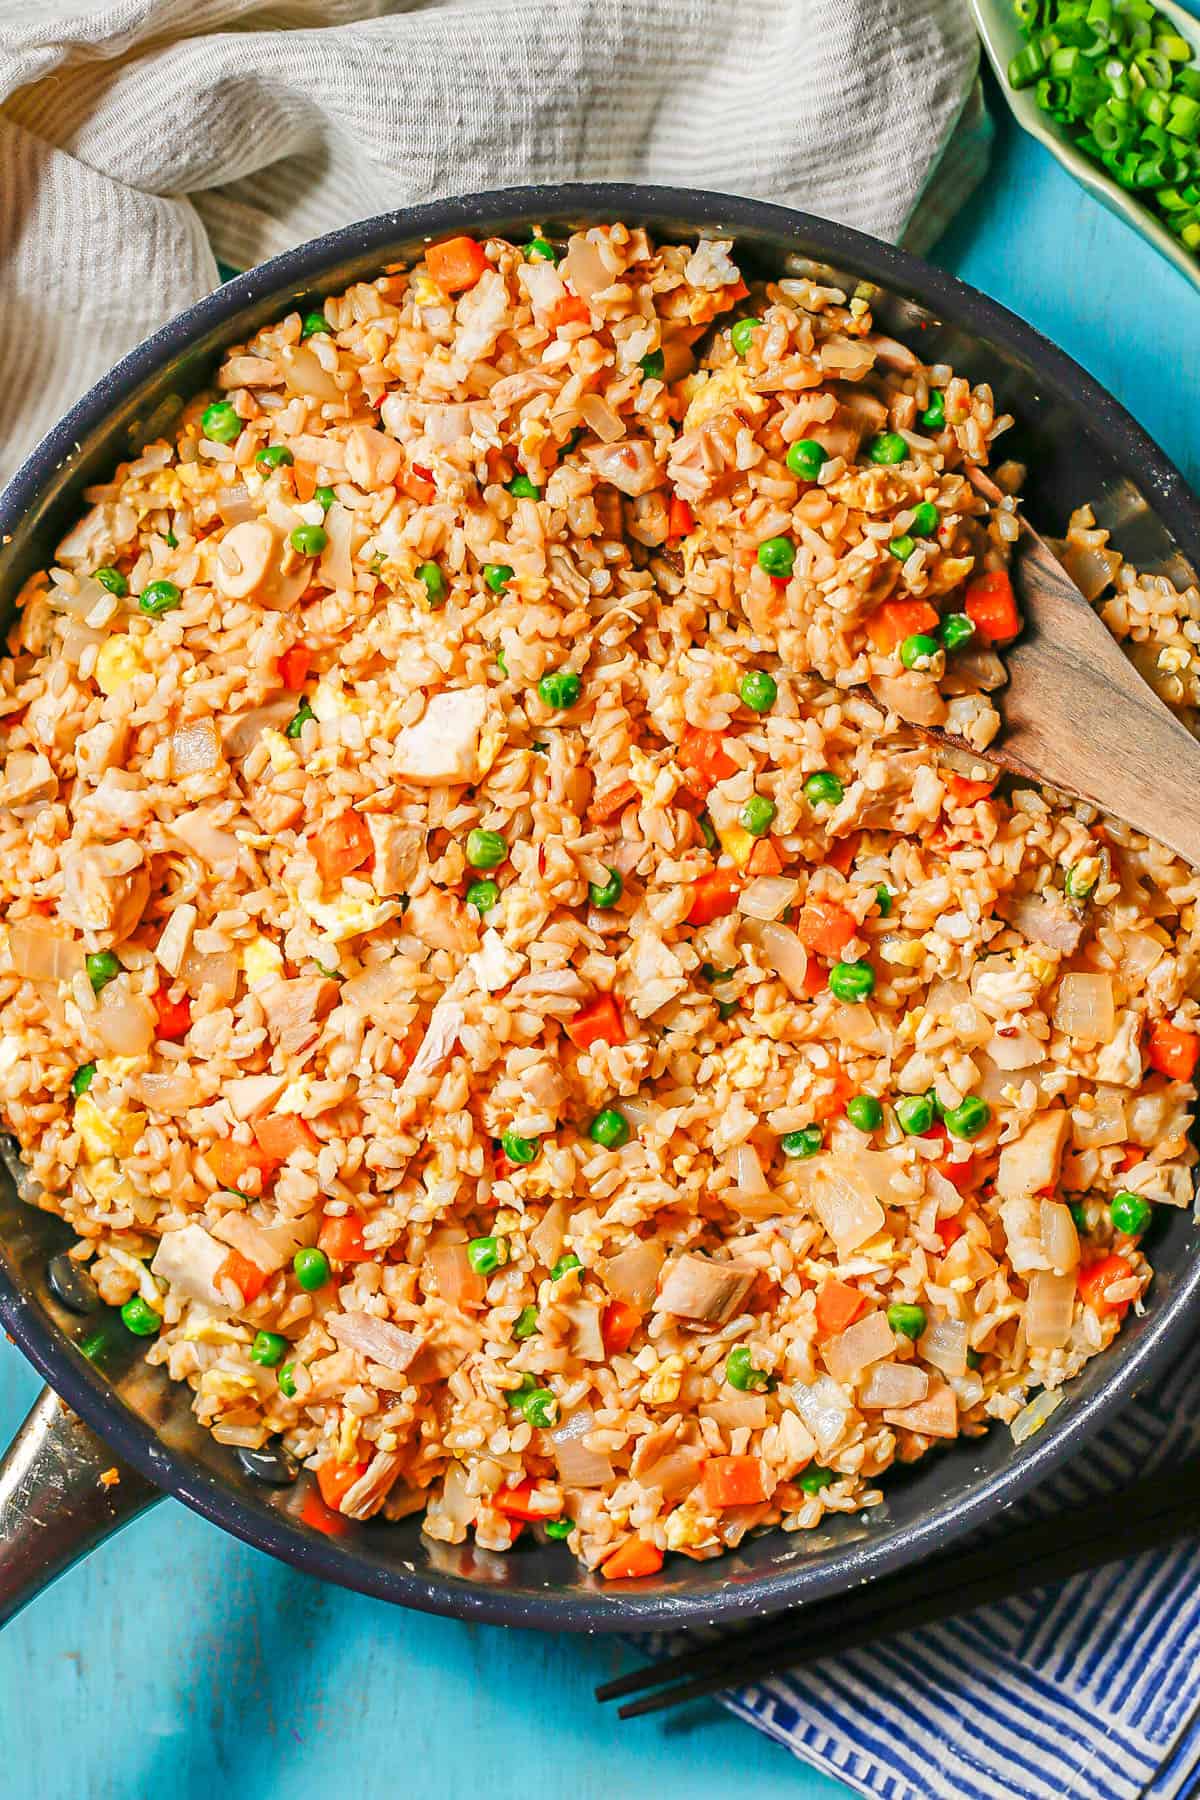 Chicken fried rice in a large dark skillet with a wooden spoon lifting a scoop and some chopped green onions in a dish to the side.